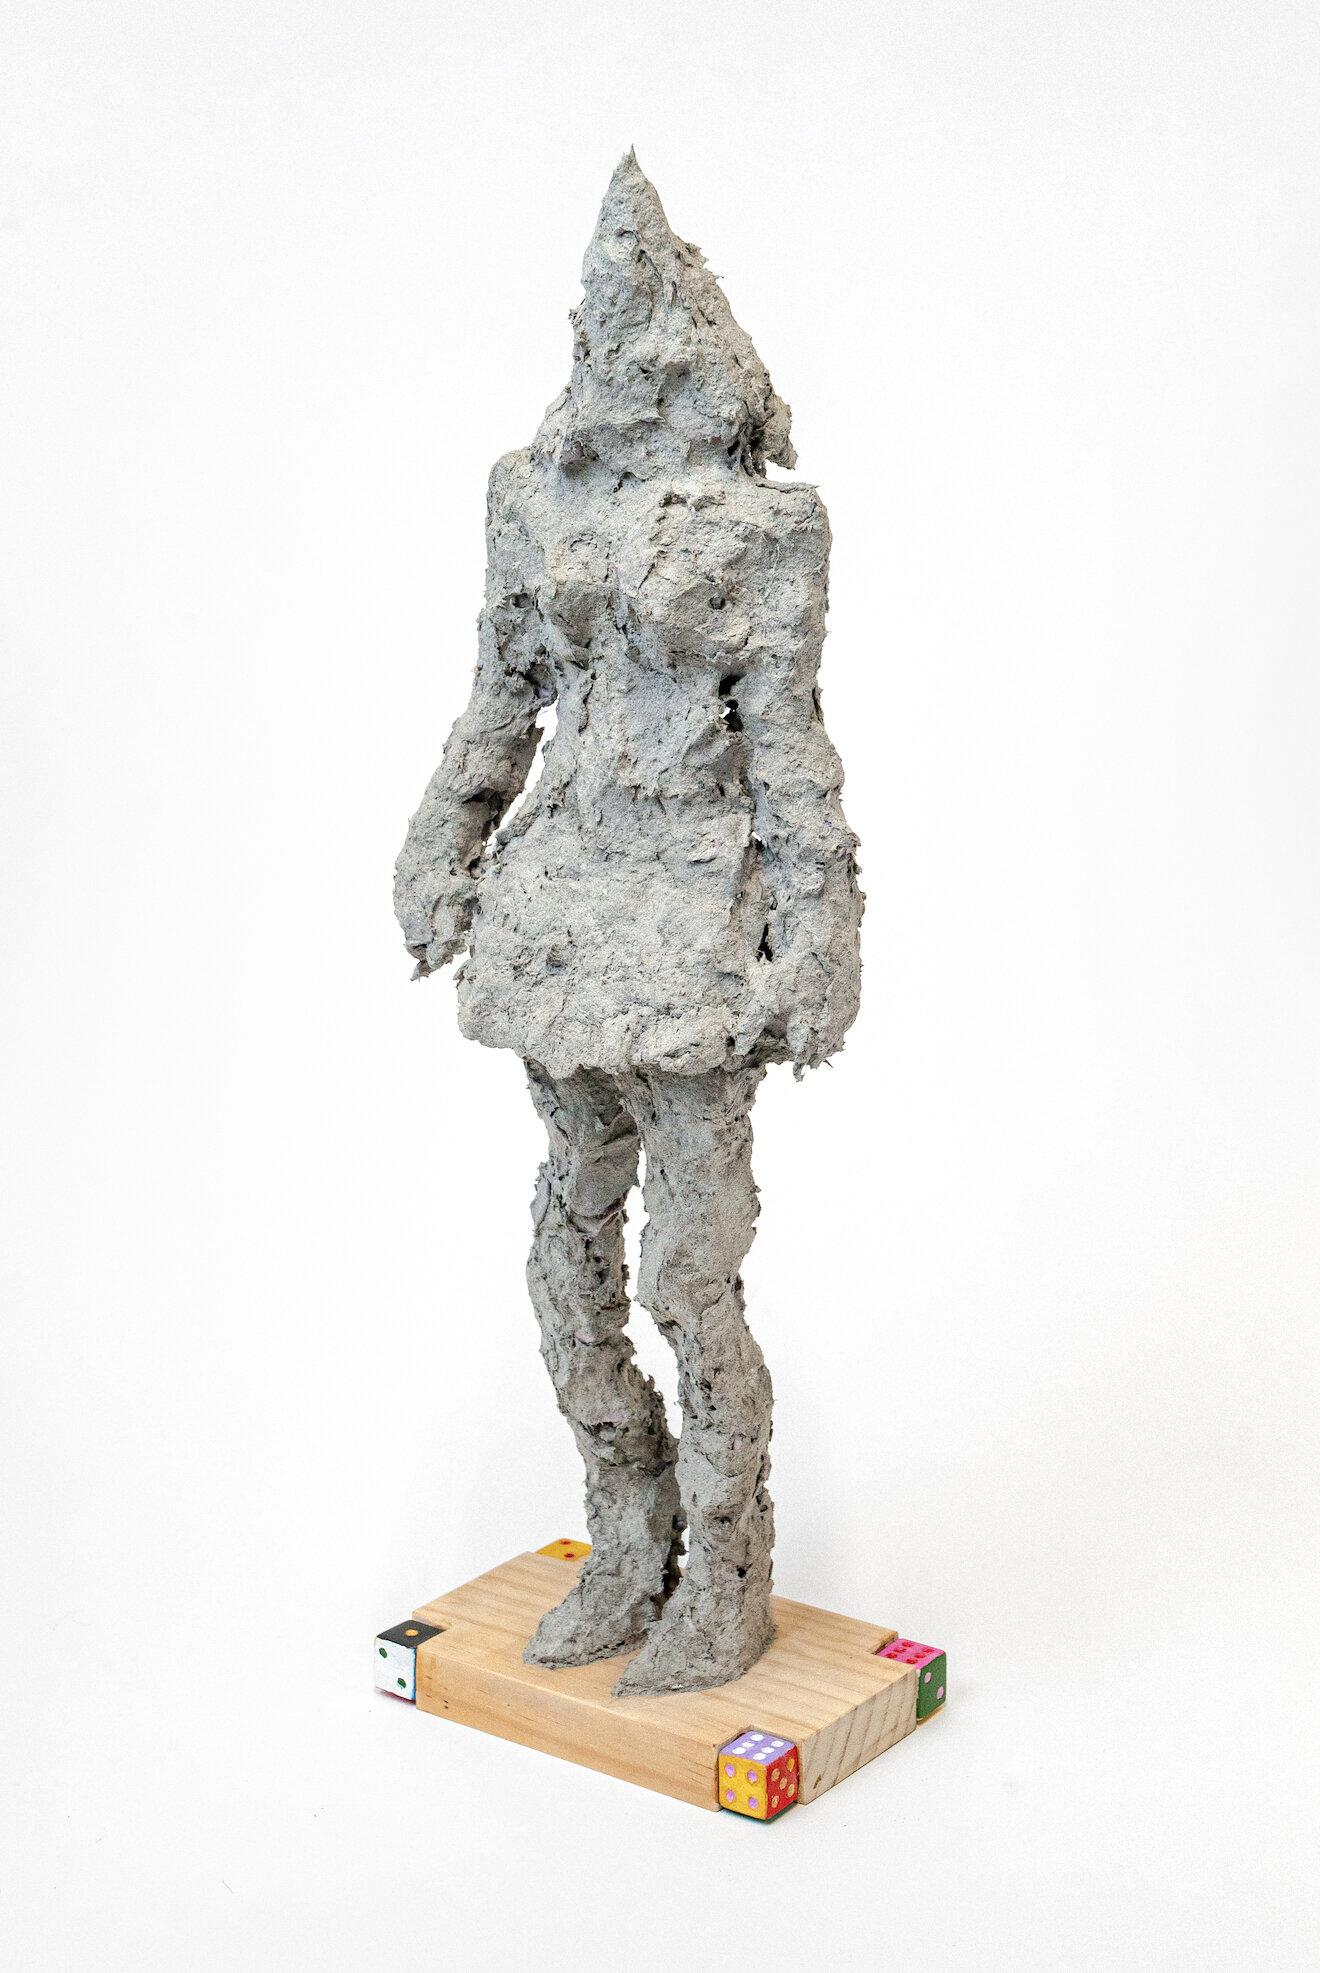  Chase Biado,  stand-up (Sailor Moon),  ​2020 papier-mâché, foam, steel, wood, acrylic 17 inches tall  